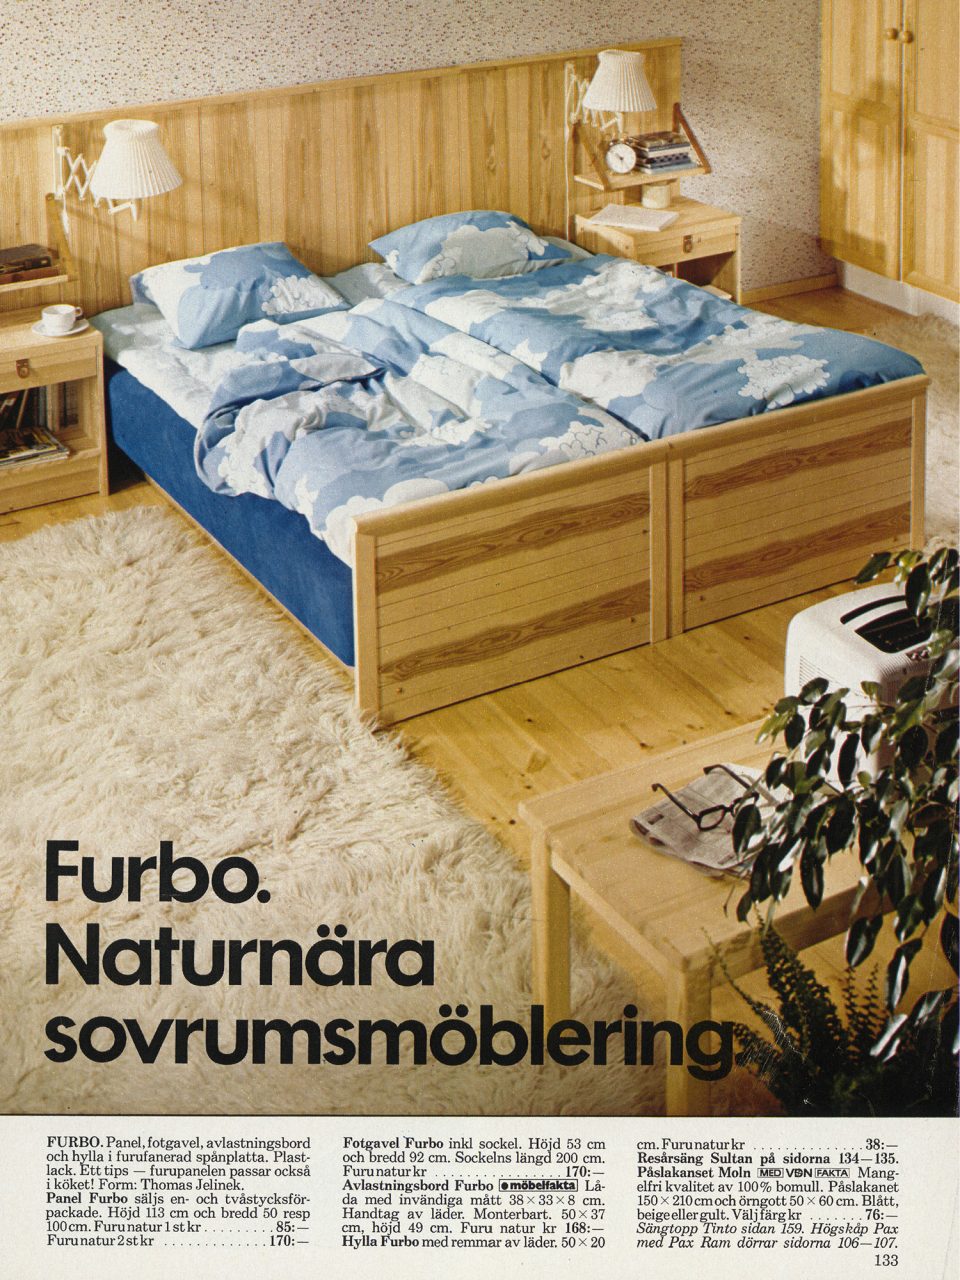 1977 IKEA catalogue bedroom scene with MOLN duvet sets, sky blue with white clouds.